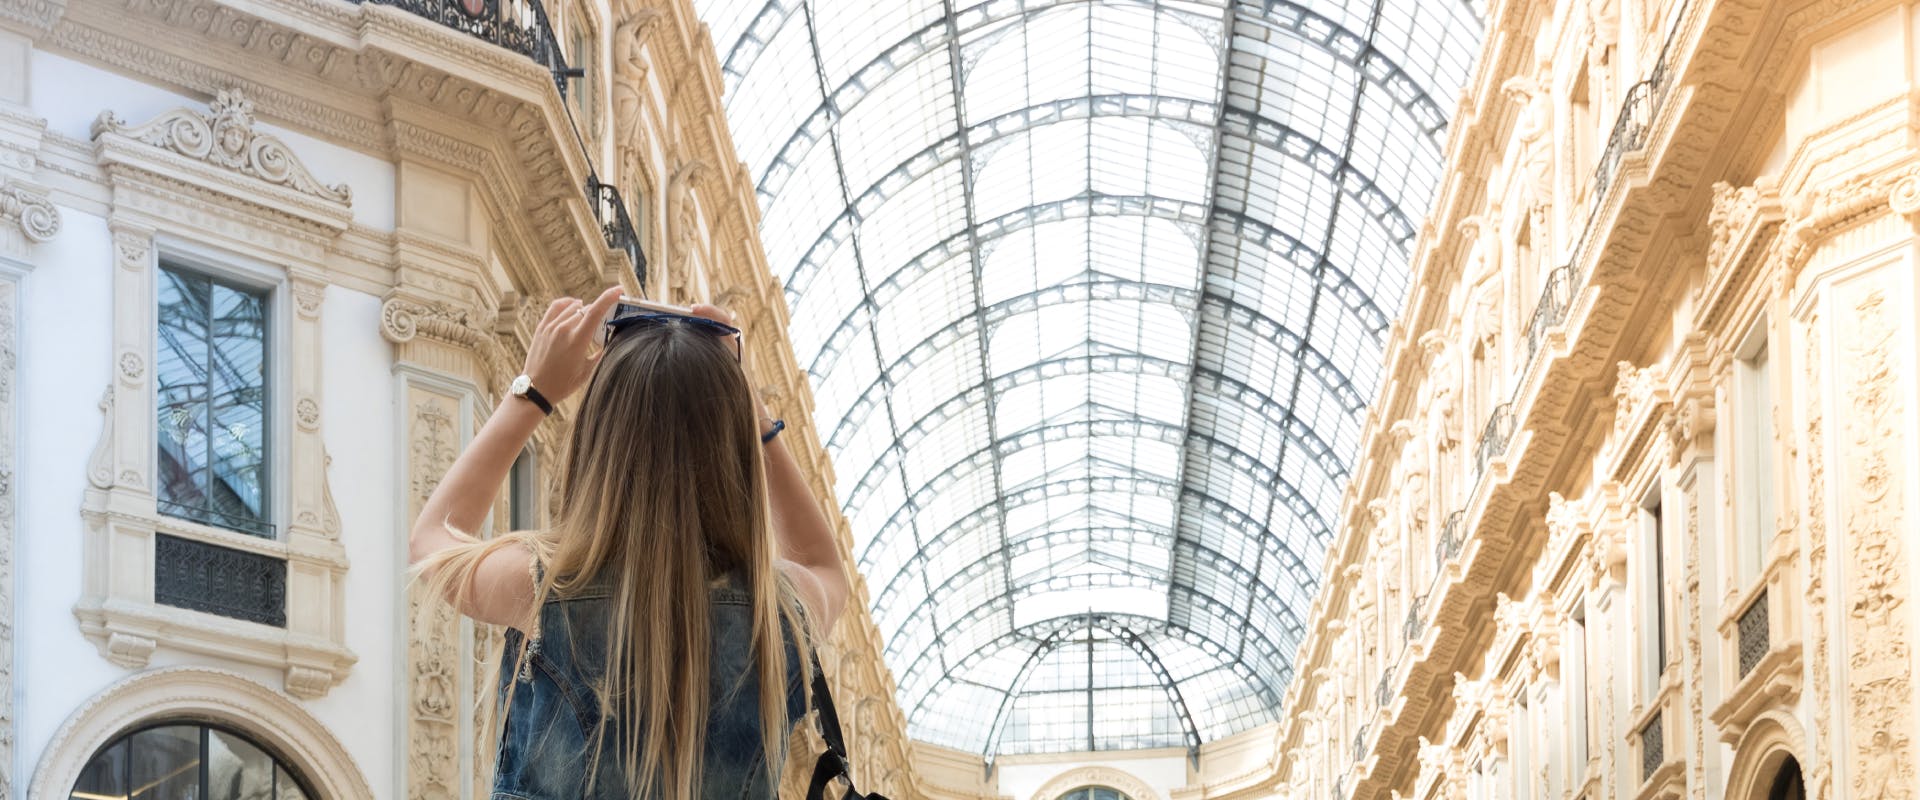 A woman photographing the ceiling of Galleria Vittorio Emanuele II.